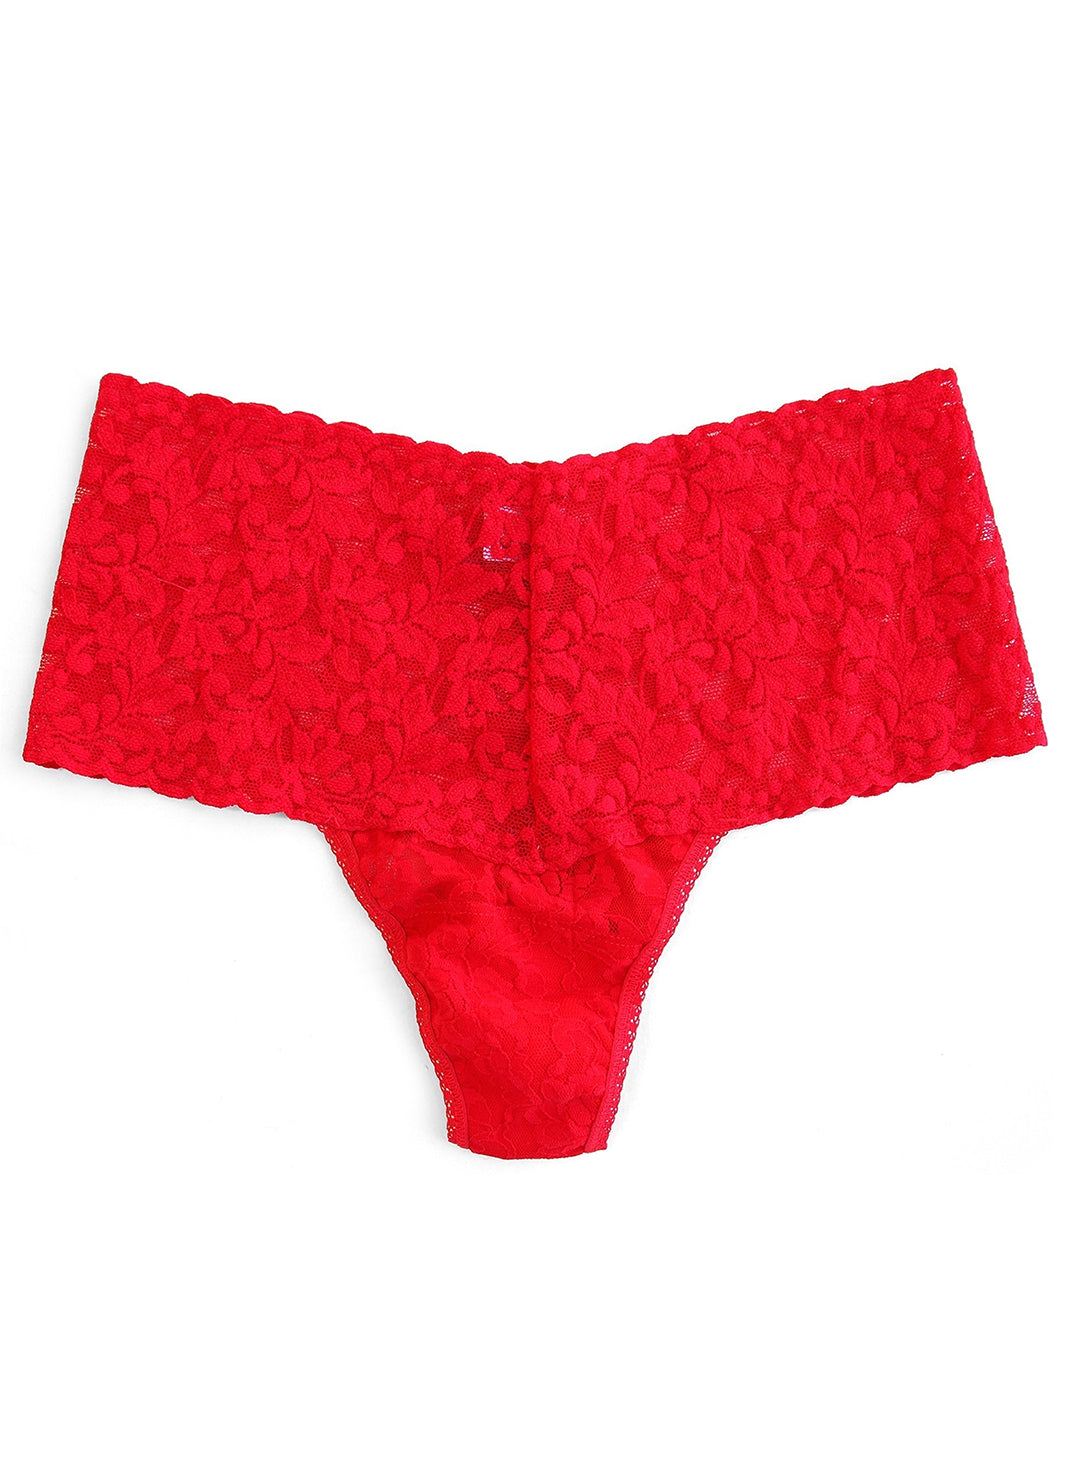 Hanky Panky Retro Thong in Red